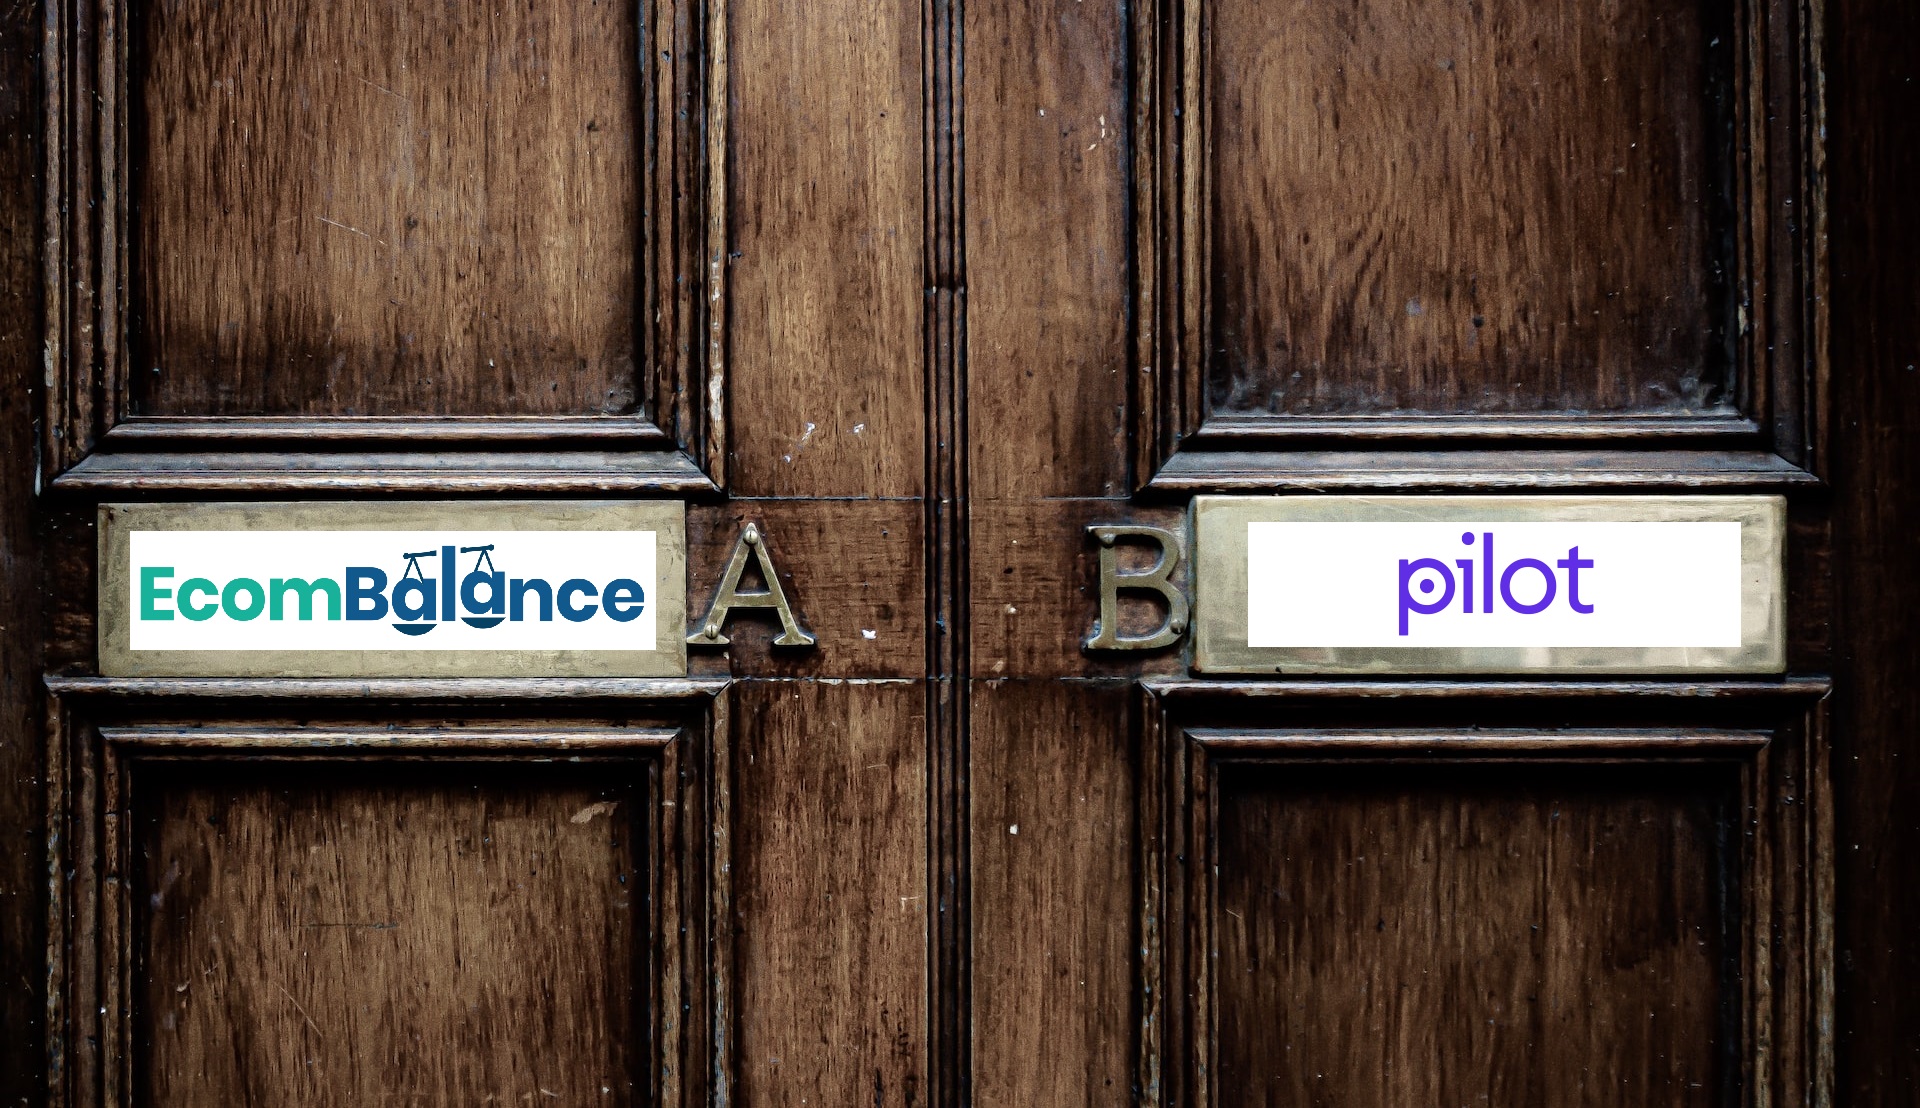 An image of two doors showing EcomBalance vs Pilot